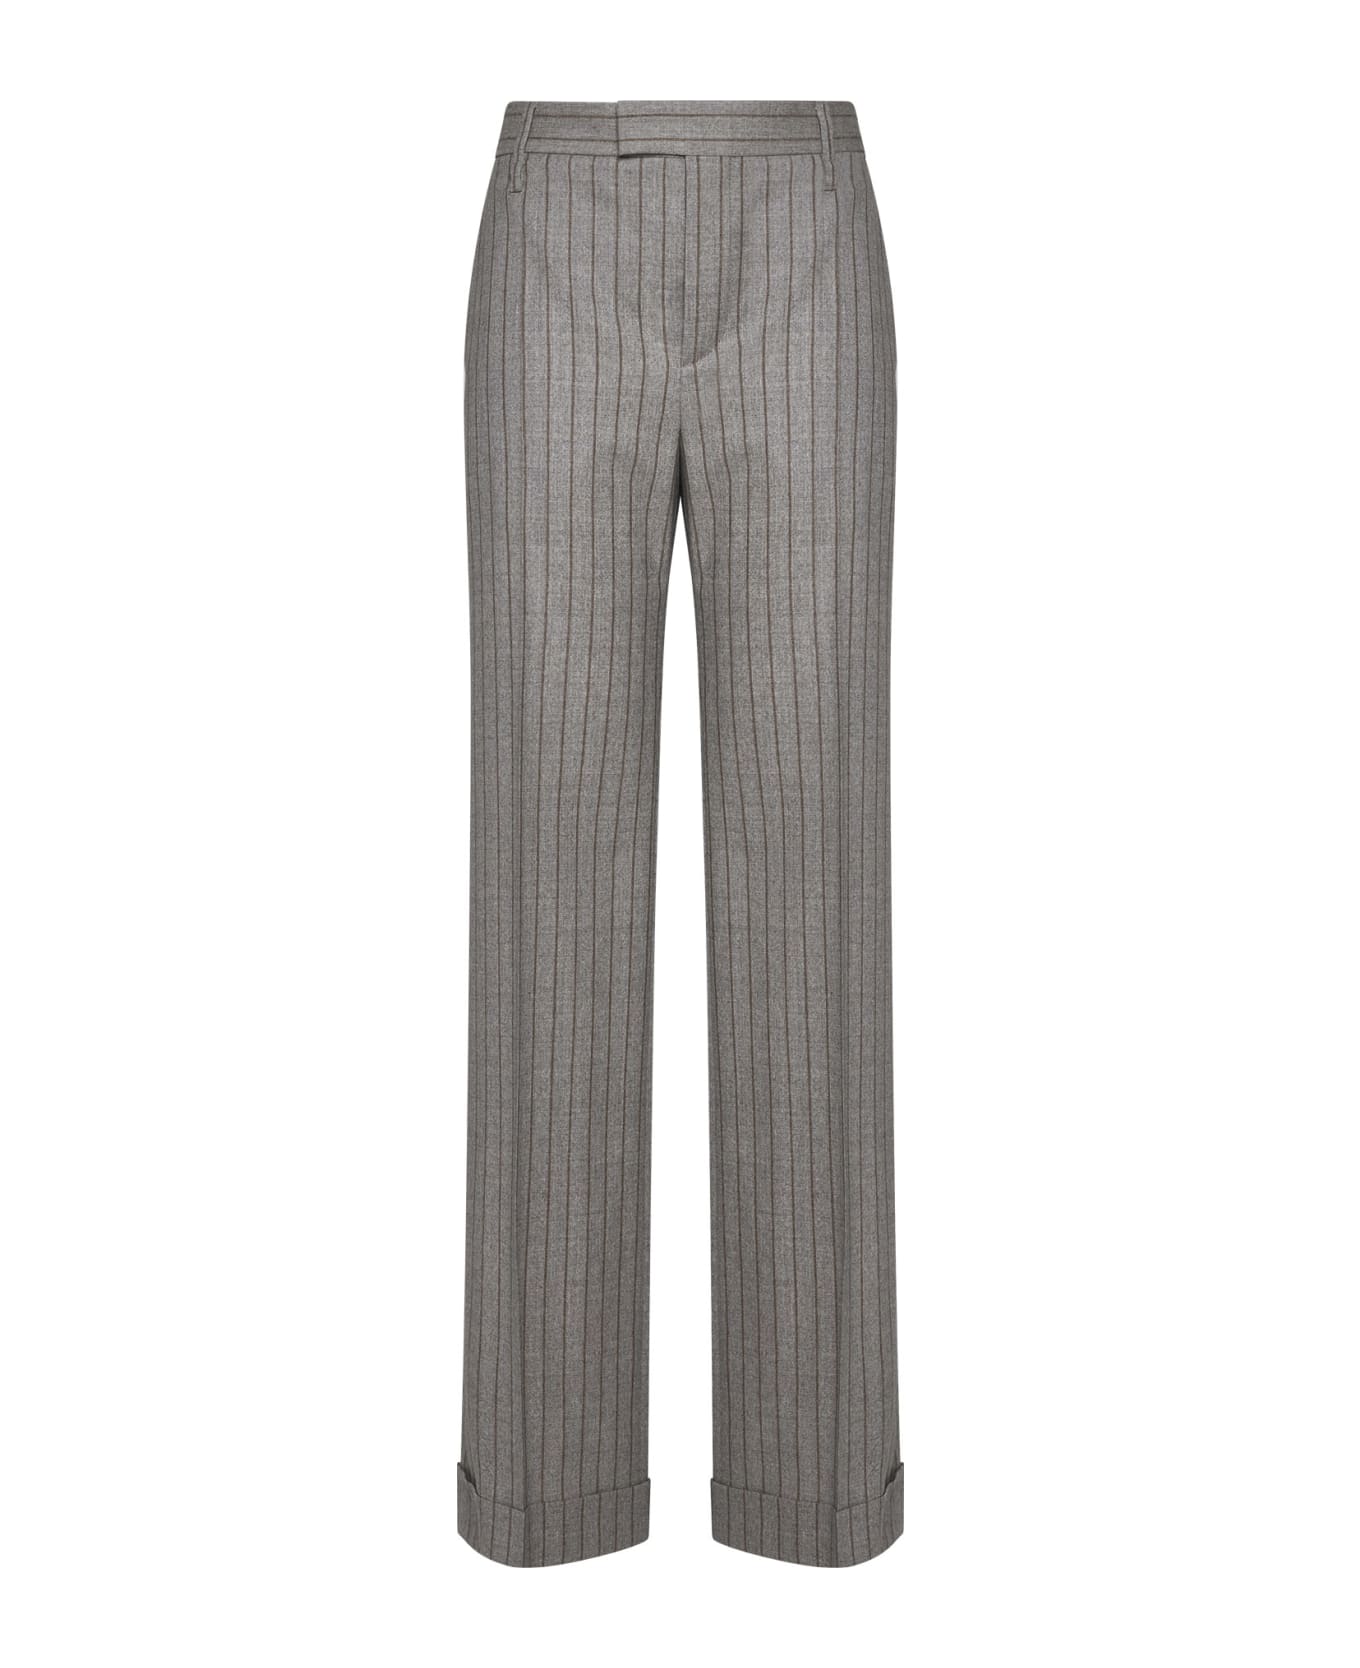 Brunello Cucinelli Pants - Taupe/tabacco